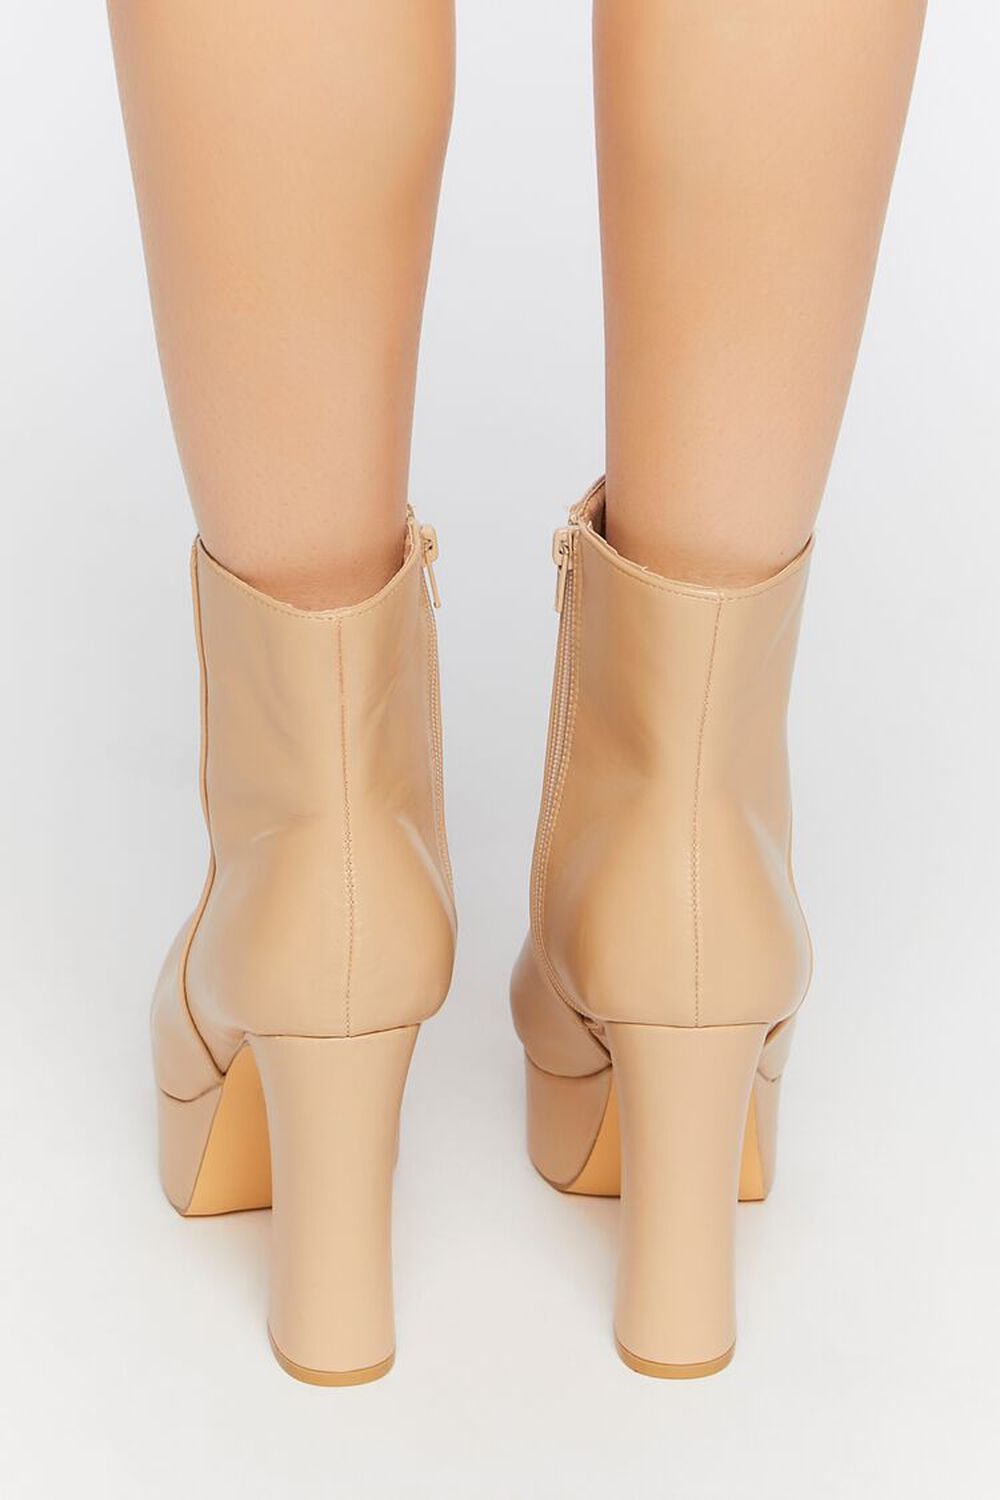 NUDE Faux Leather Platform Booties, image 3